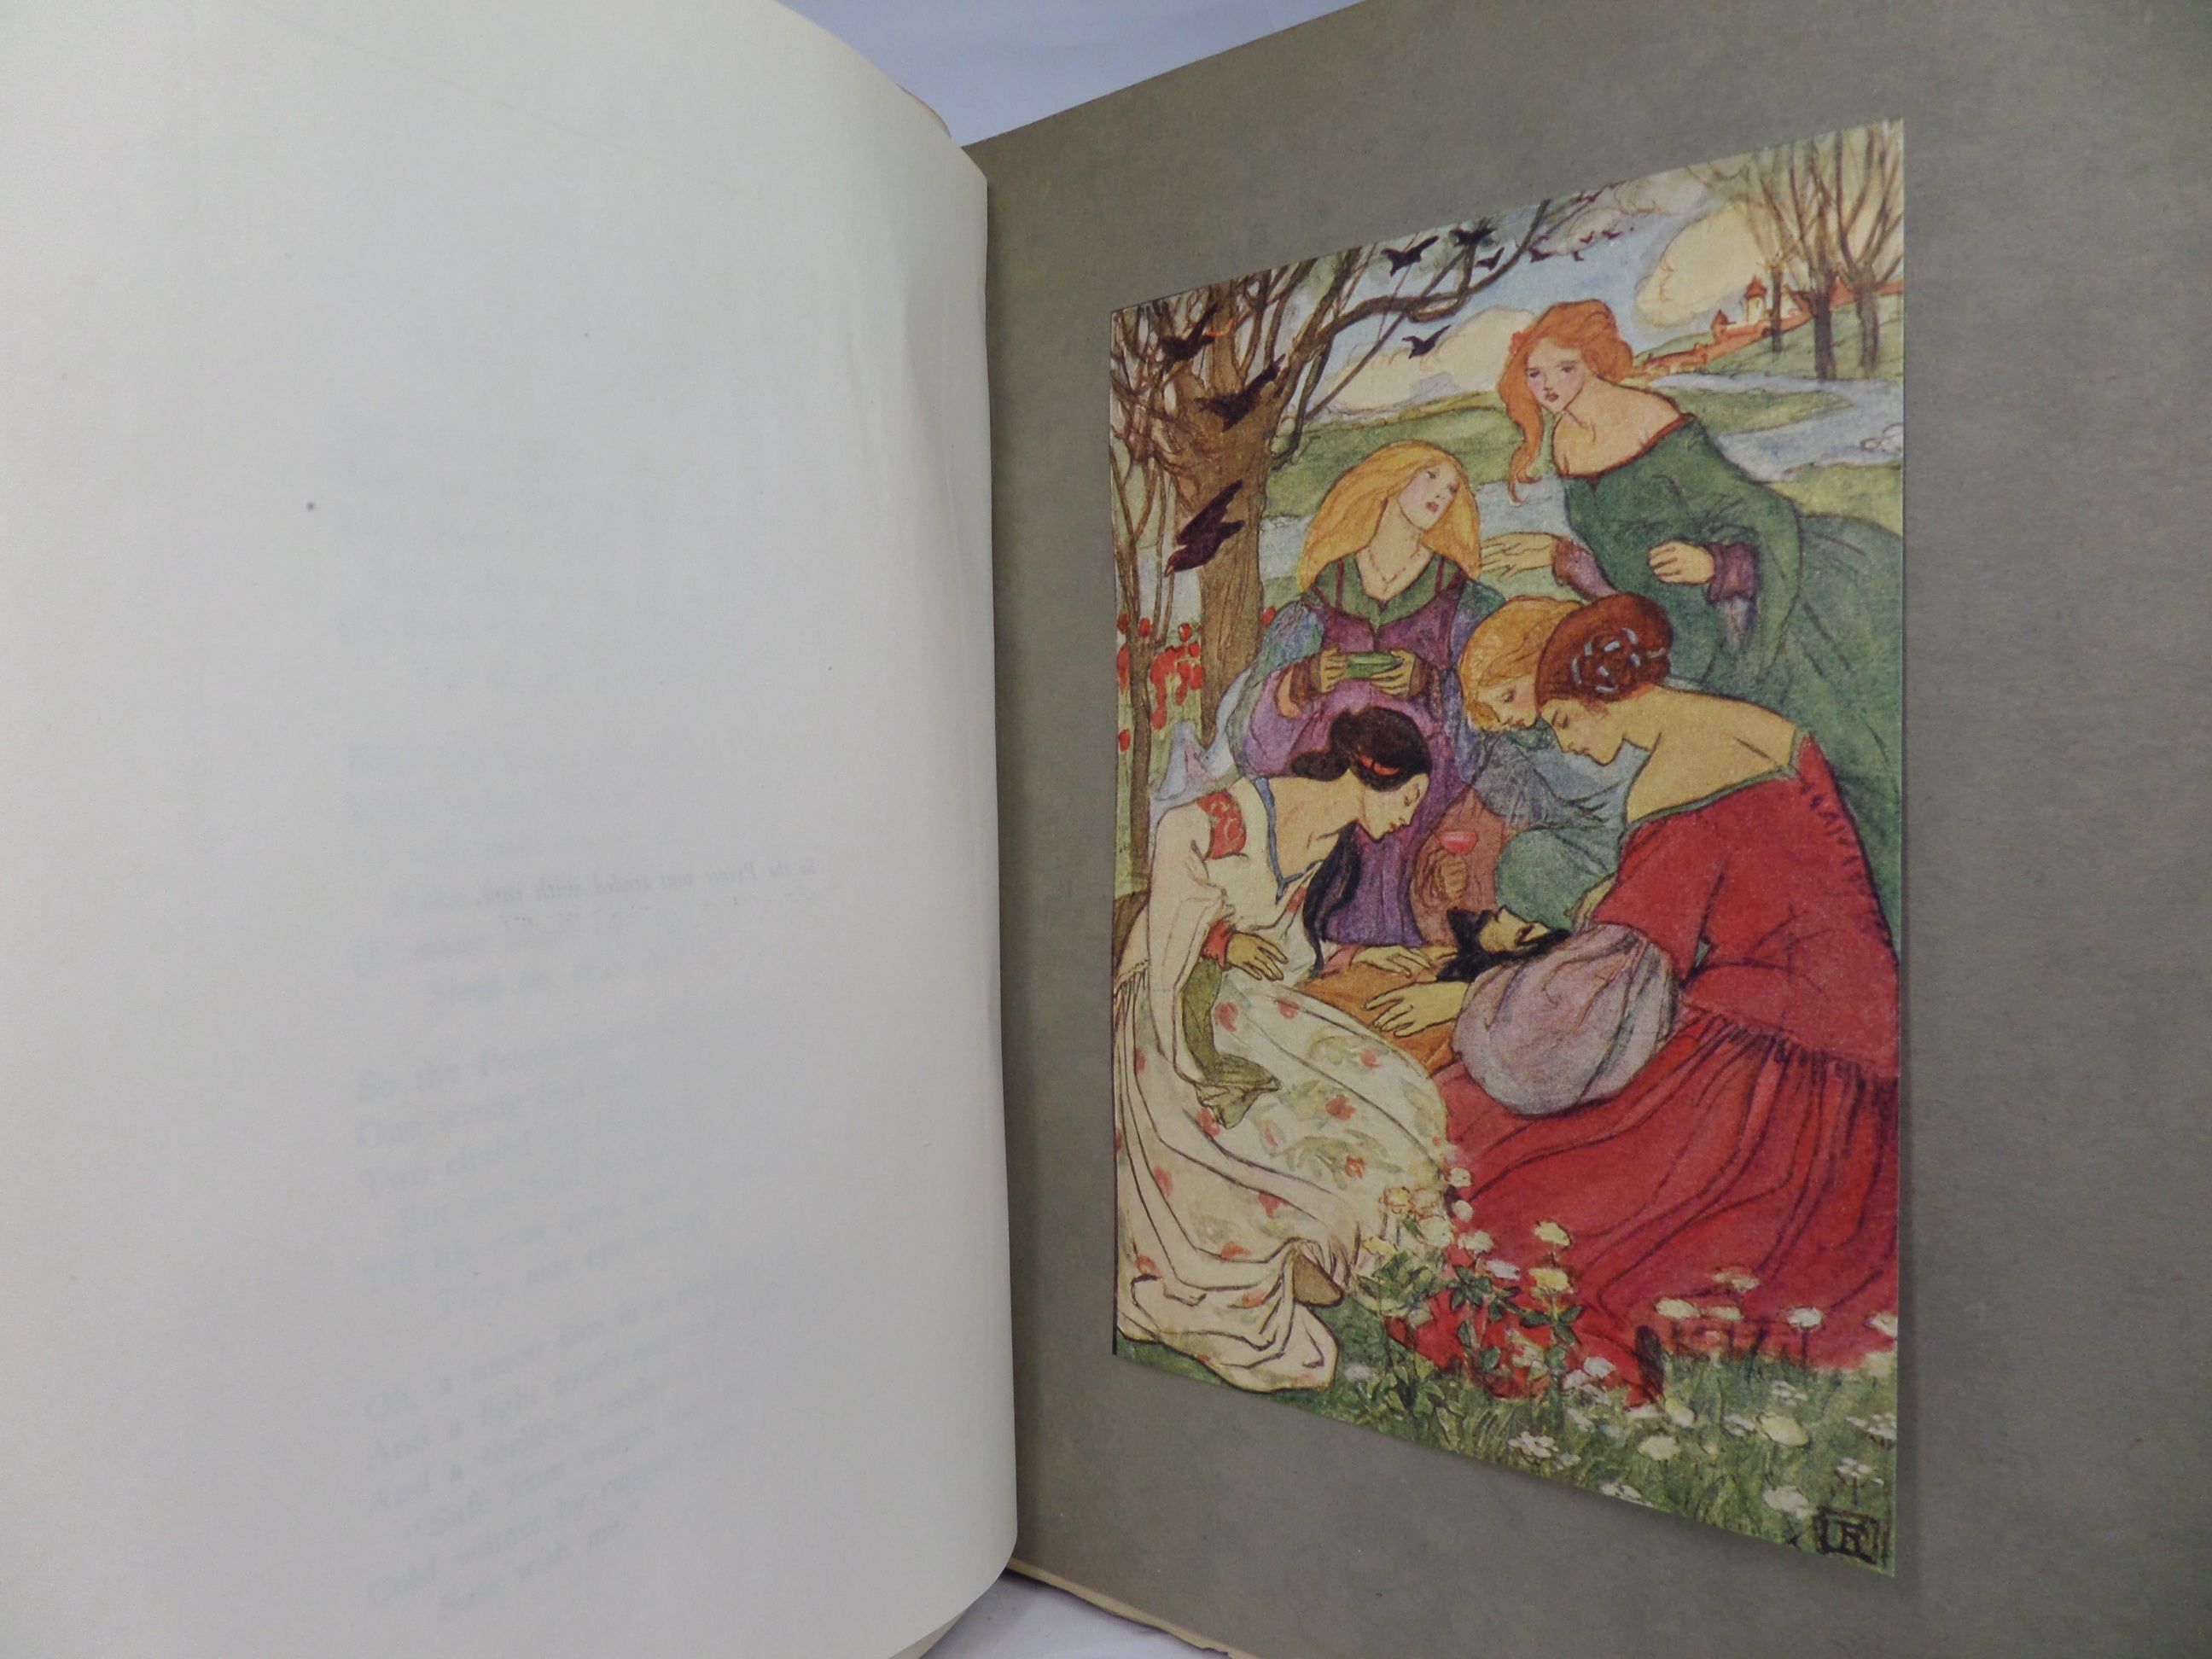 POEMS BY CHRISTINA ROSSETTI 1910 FLORENCE HARRISON ILLUSTRATIONS